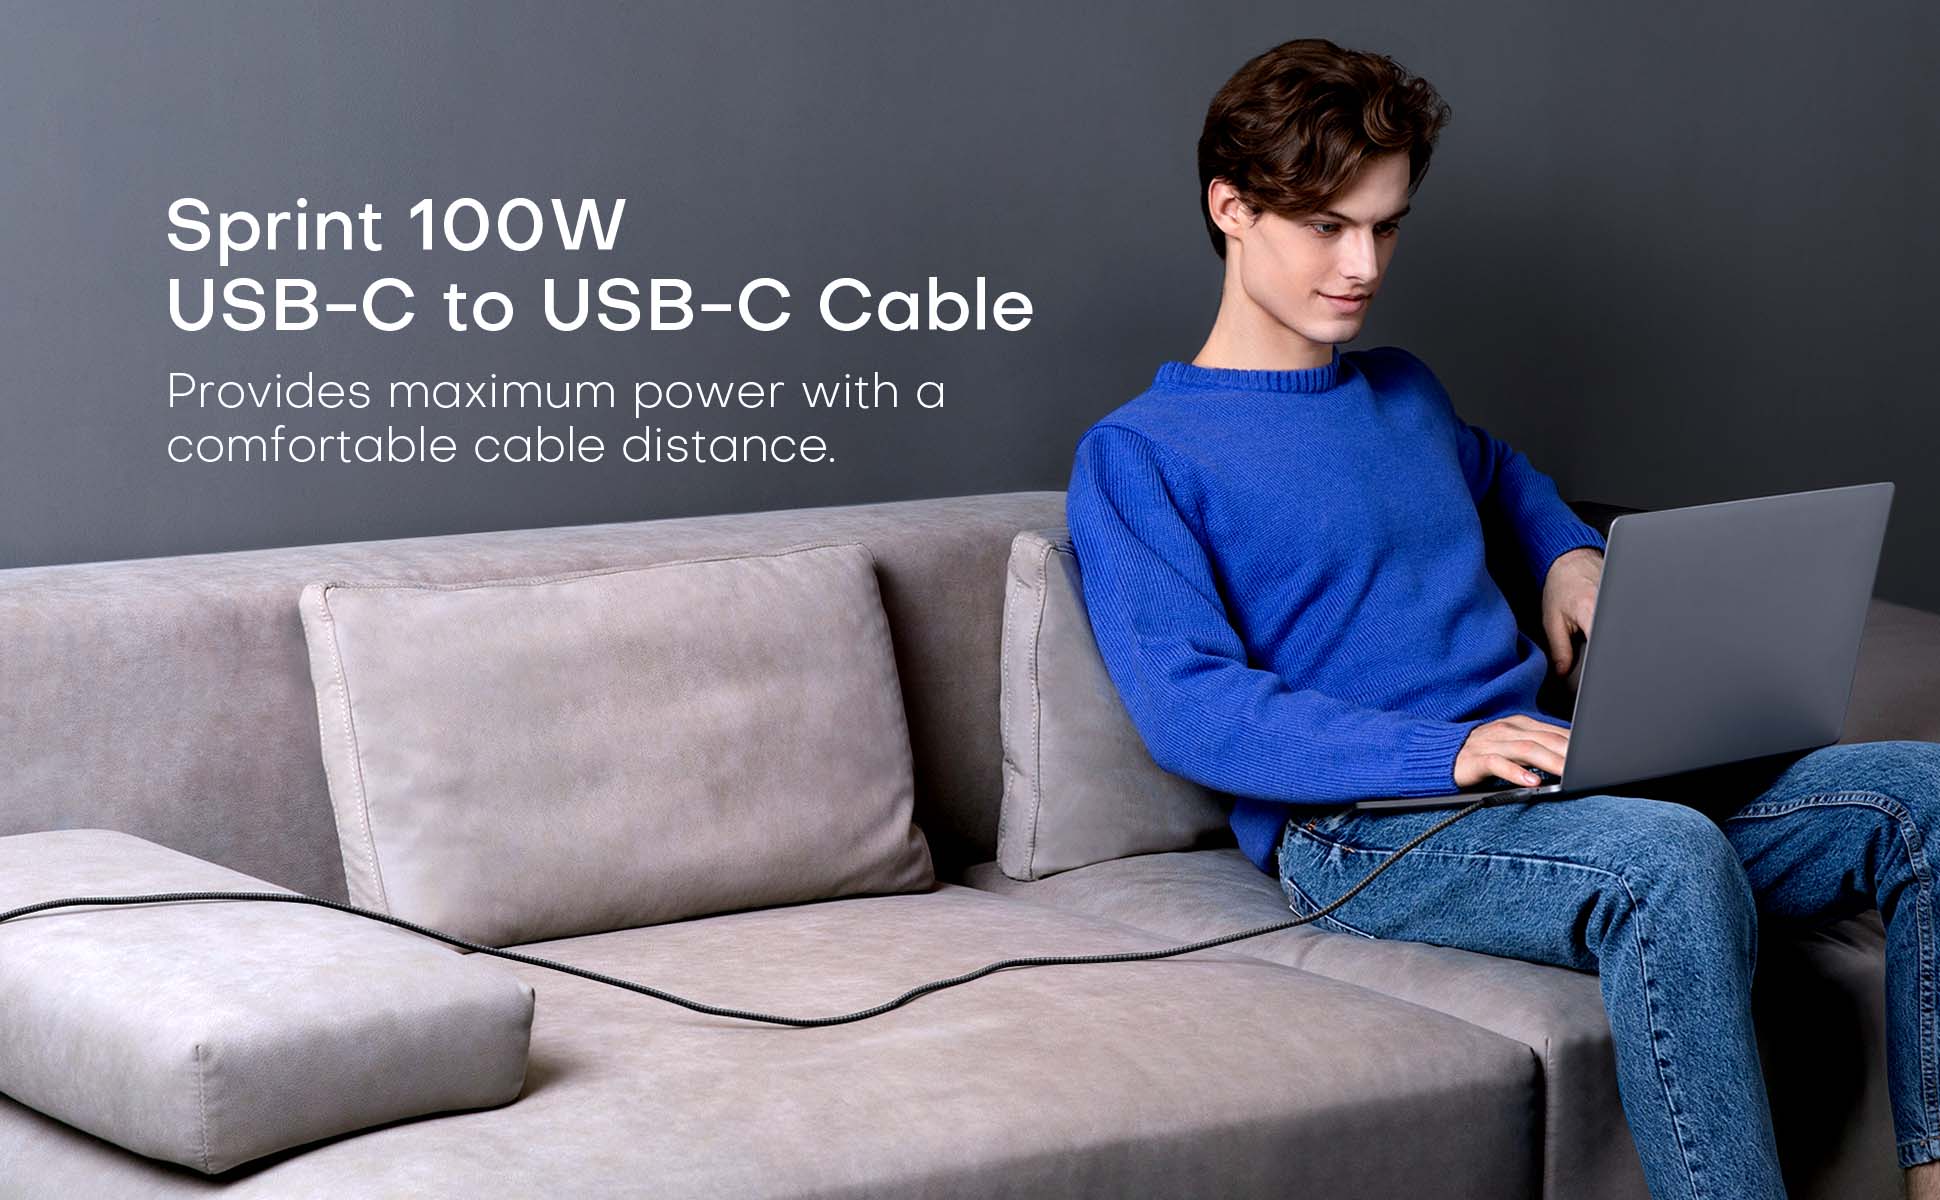 provides maximum power with a comfortable cable distance